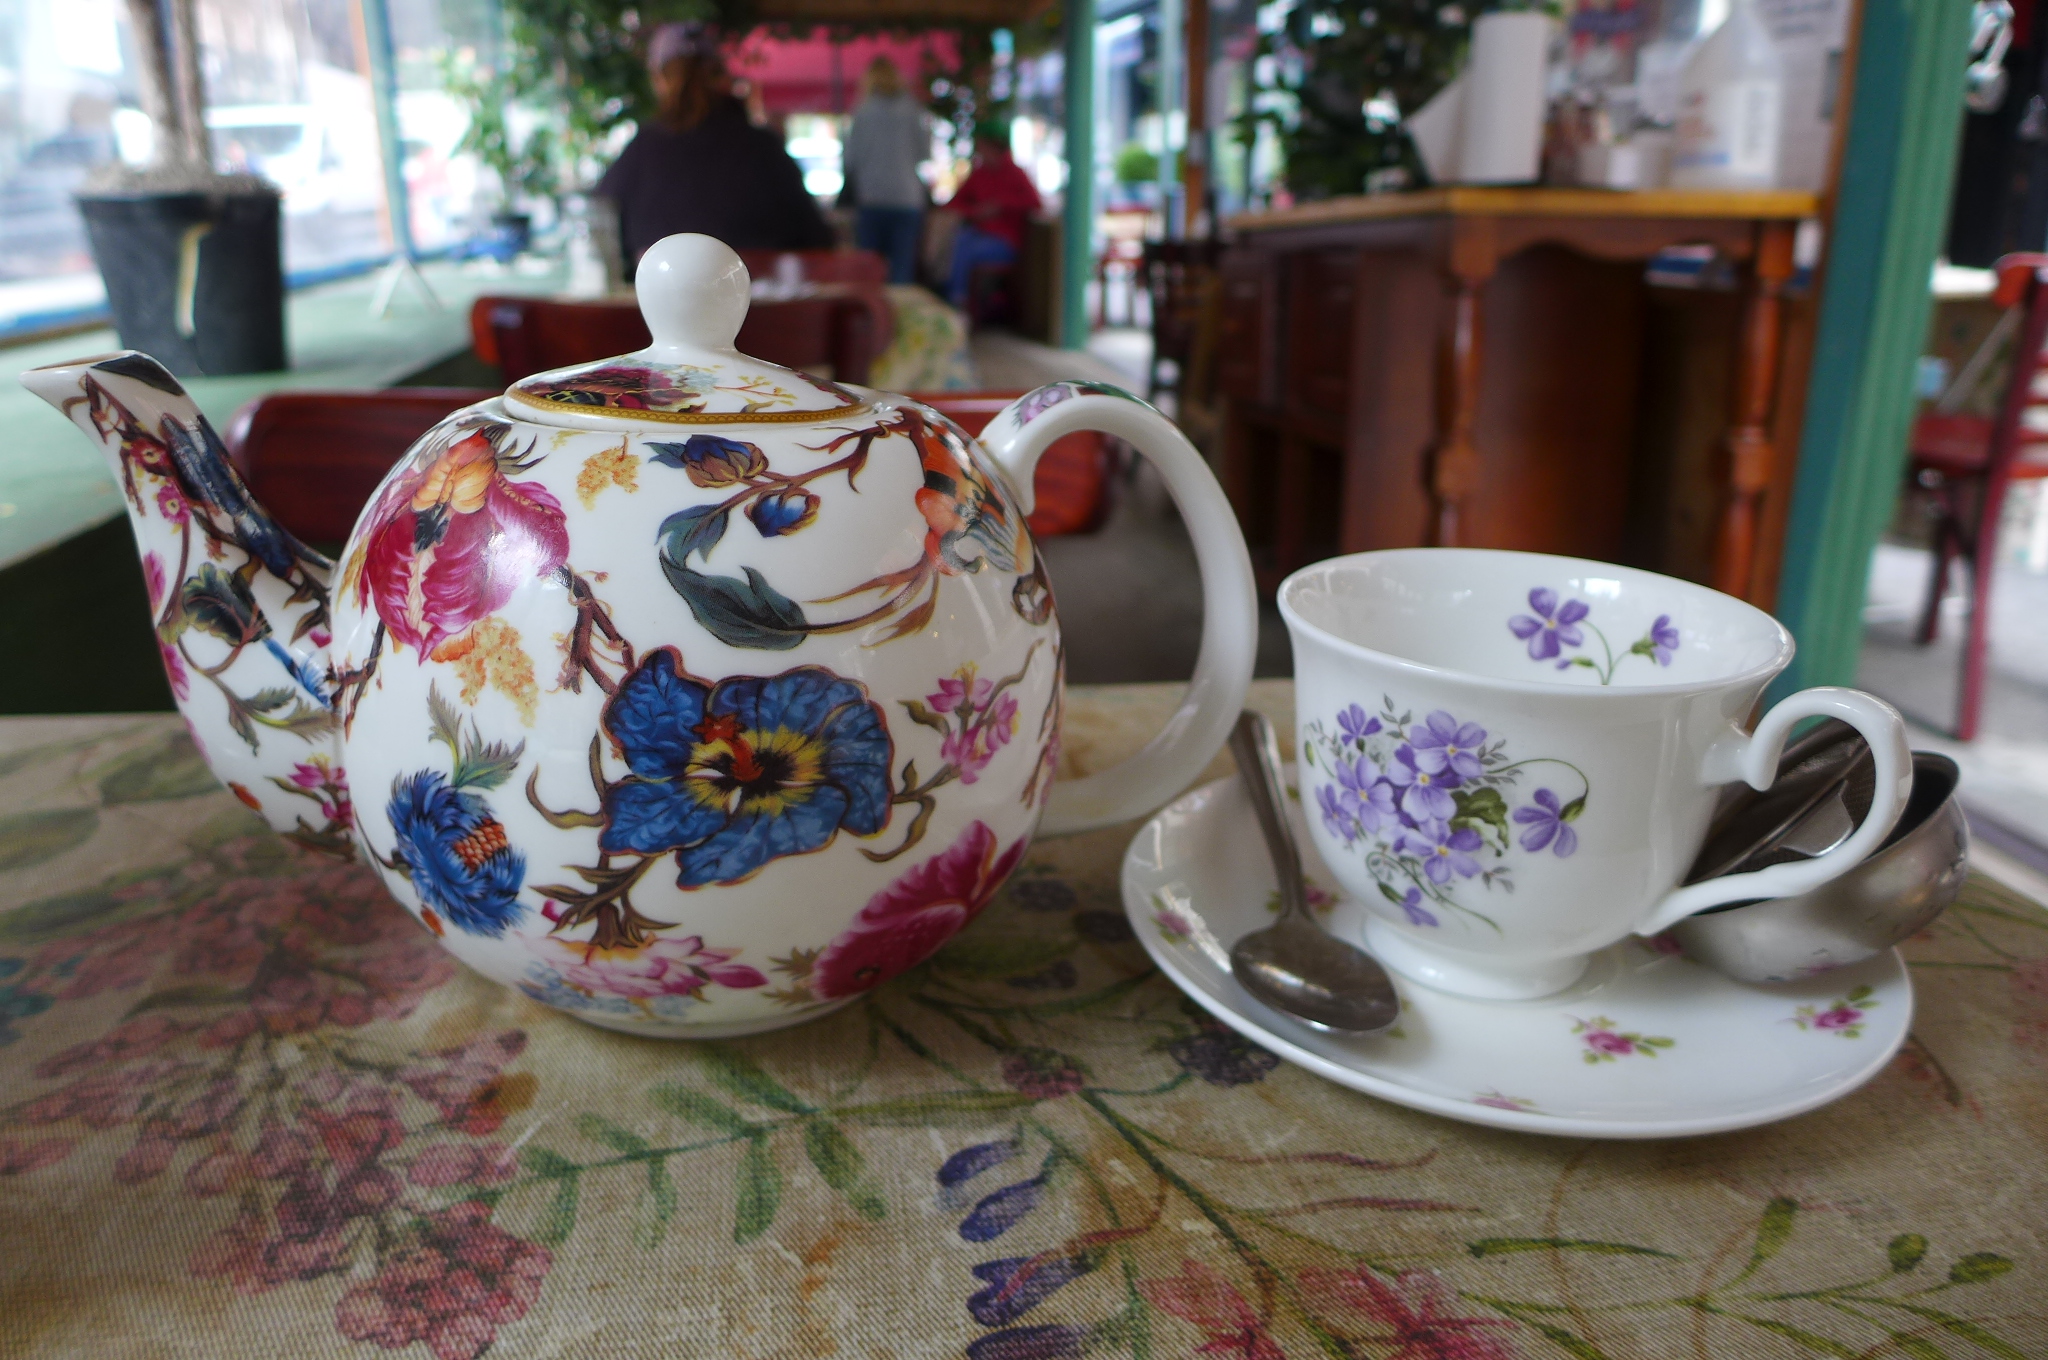 A flowered tea pot with a matching teacup on the side.